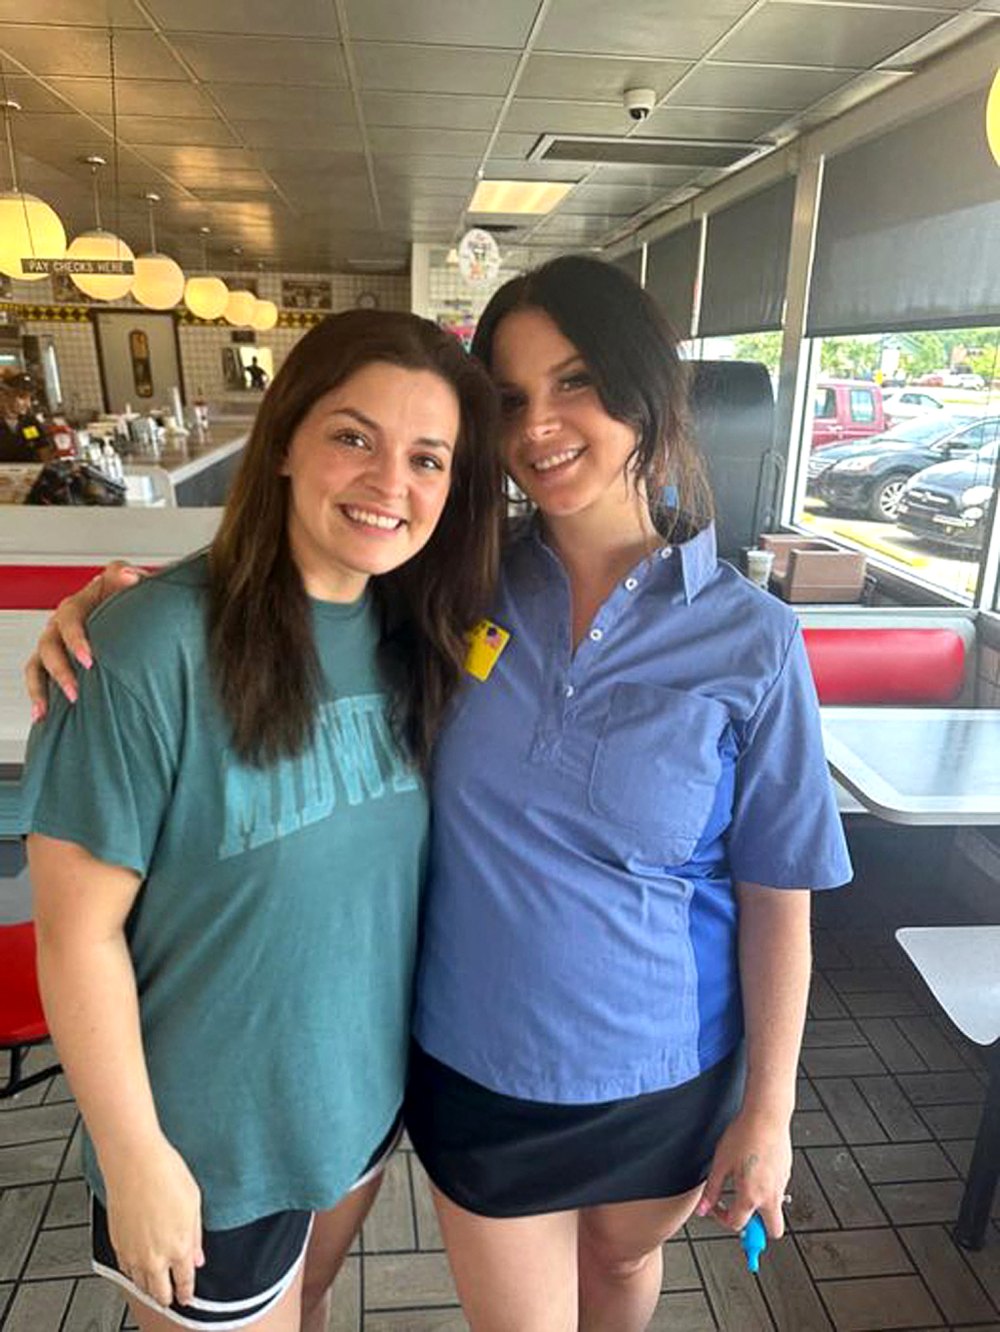 Lana Del Rey Served a Customer a Tobacco Dip Cup at Her Alabama Waffle House Waitressing Stint